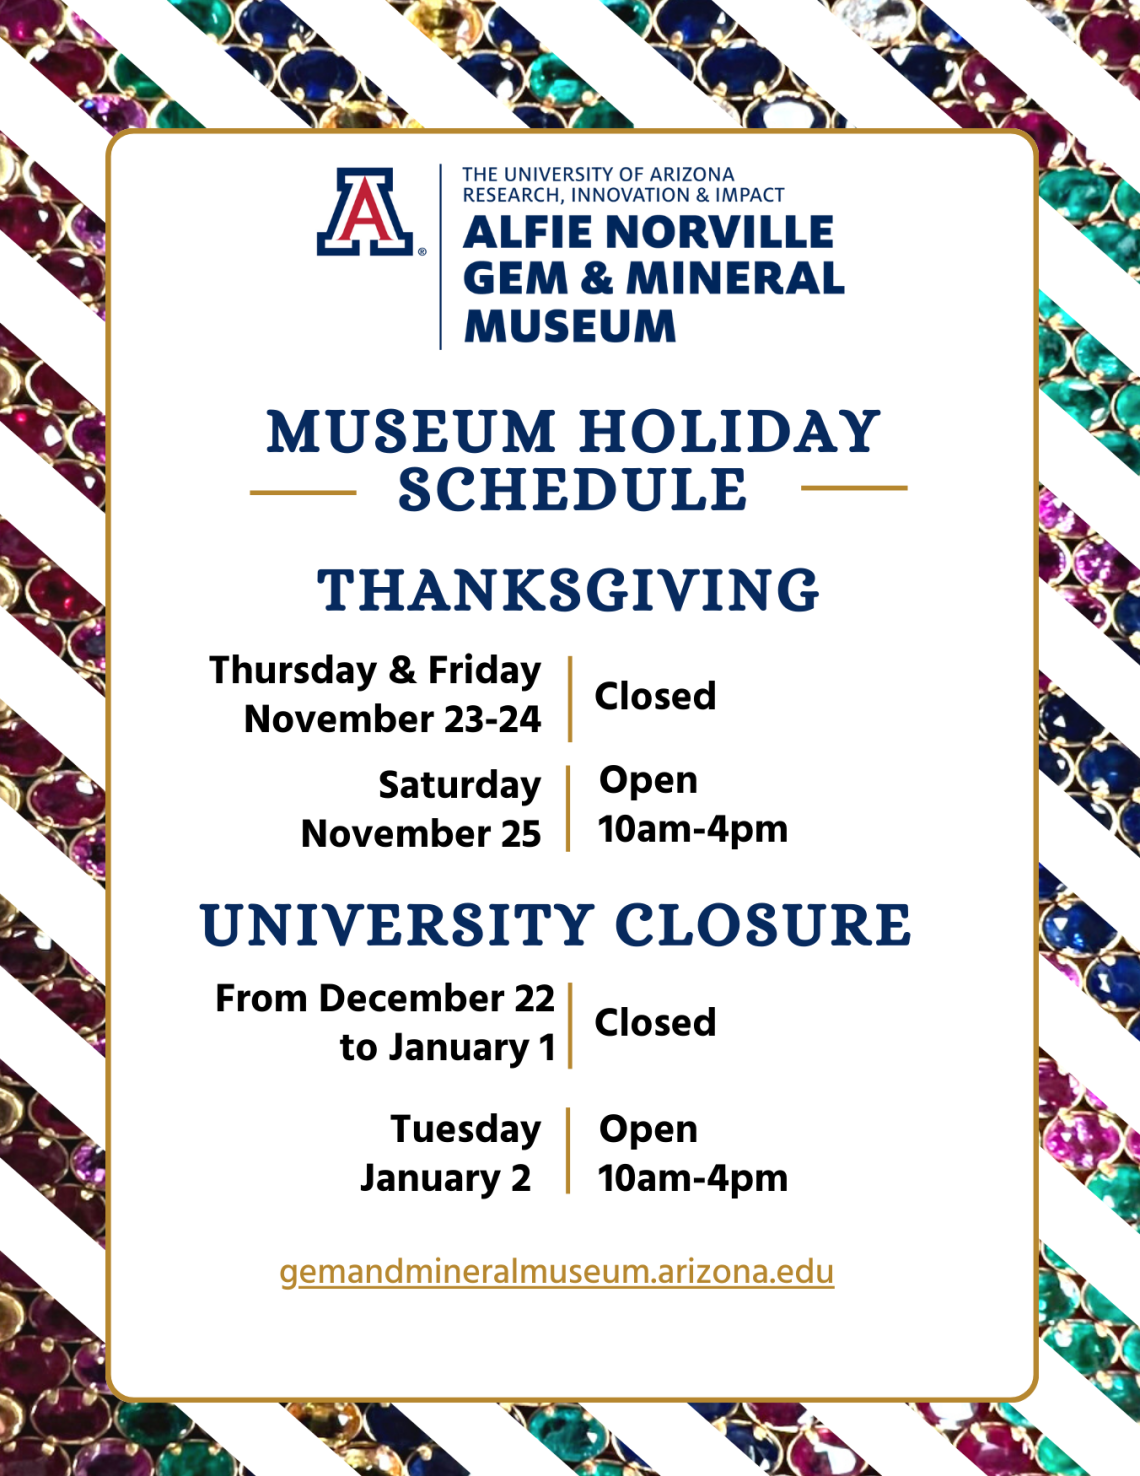 Museum Holiday Schedule: Thanksgiving closed Thursday November 23 and Friday November 24. Museum will be open Saturday November 25. For the University closure in December, the museum will be closed starting December 22nd through January 1st. We will resume our established hours of Tuesday-Saturday 10am-4pm on Tuesday January 2nd. 